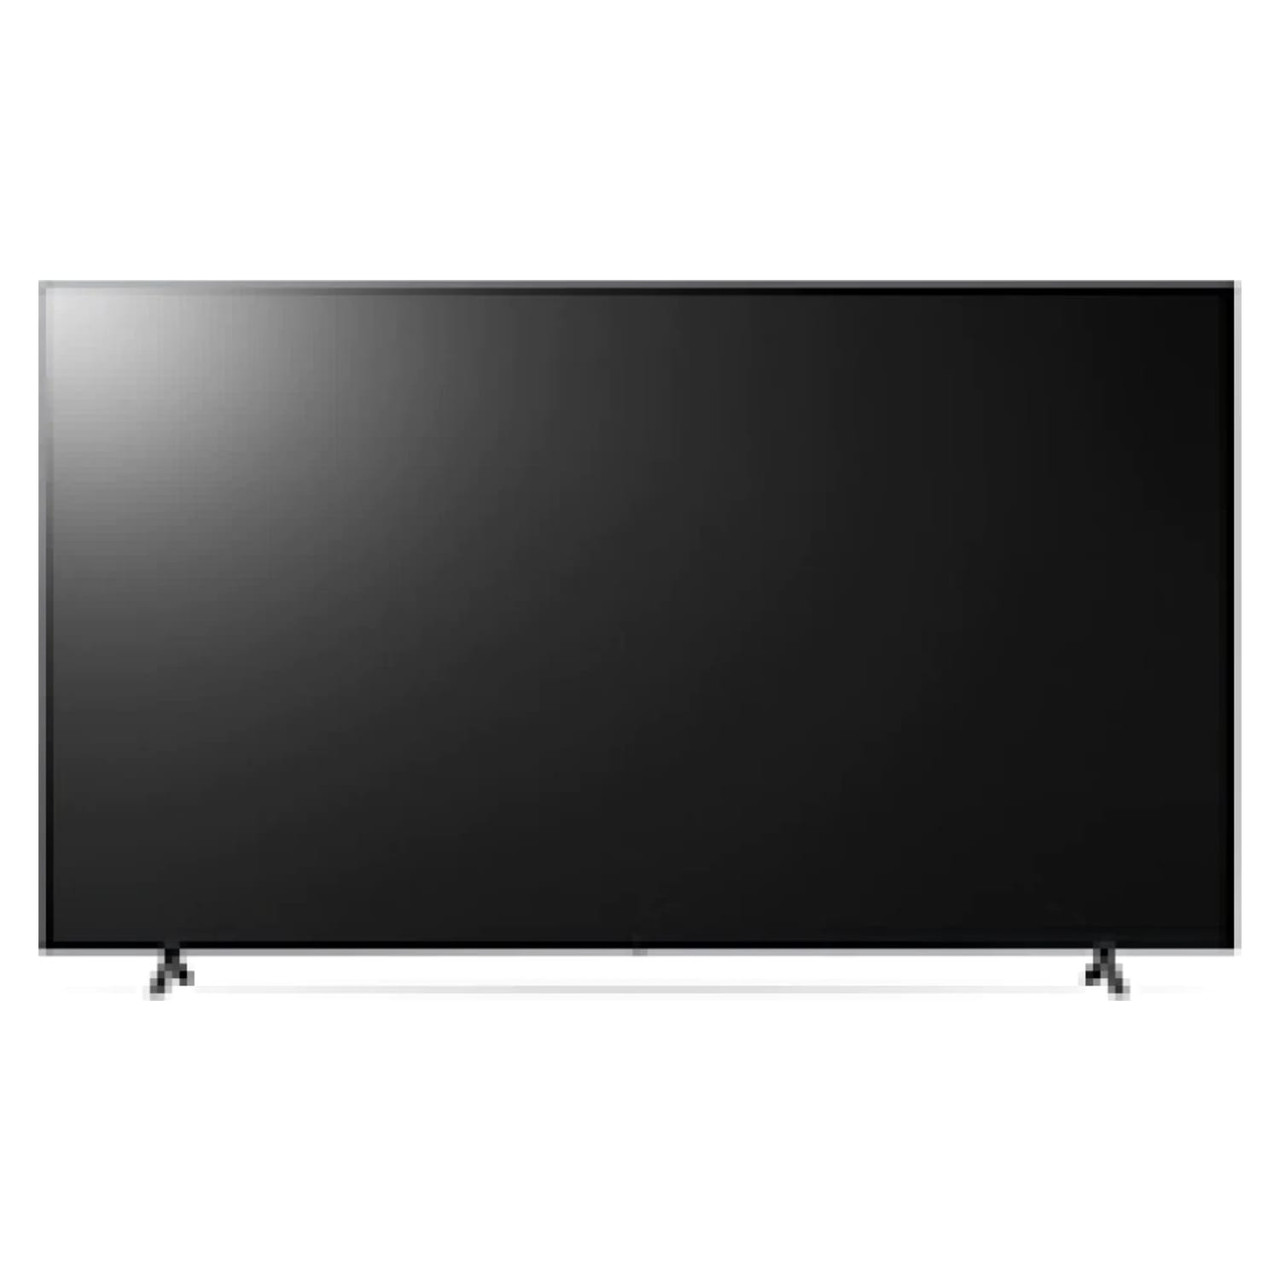 LG UHD 80 Series 75” Class 4K Smart UHD TV with AI ThinQ® - 75UP8070PUR